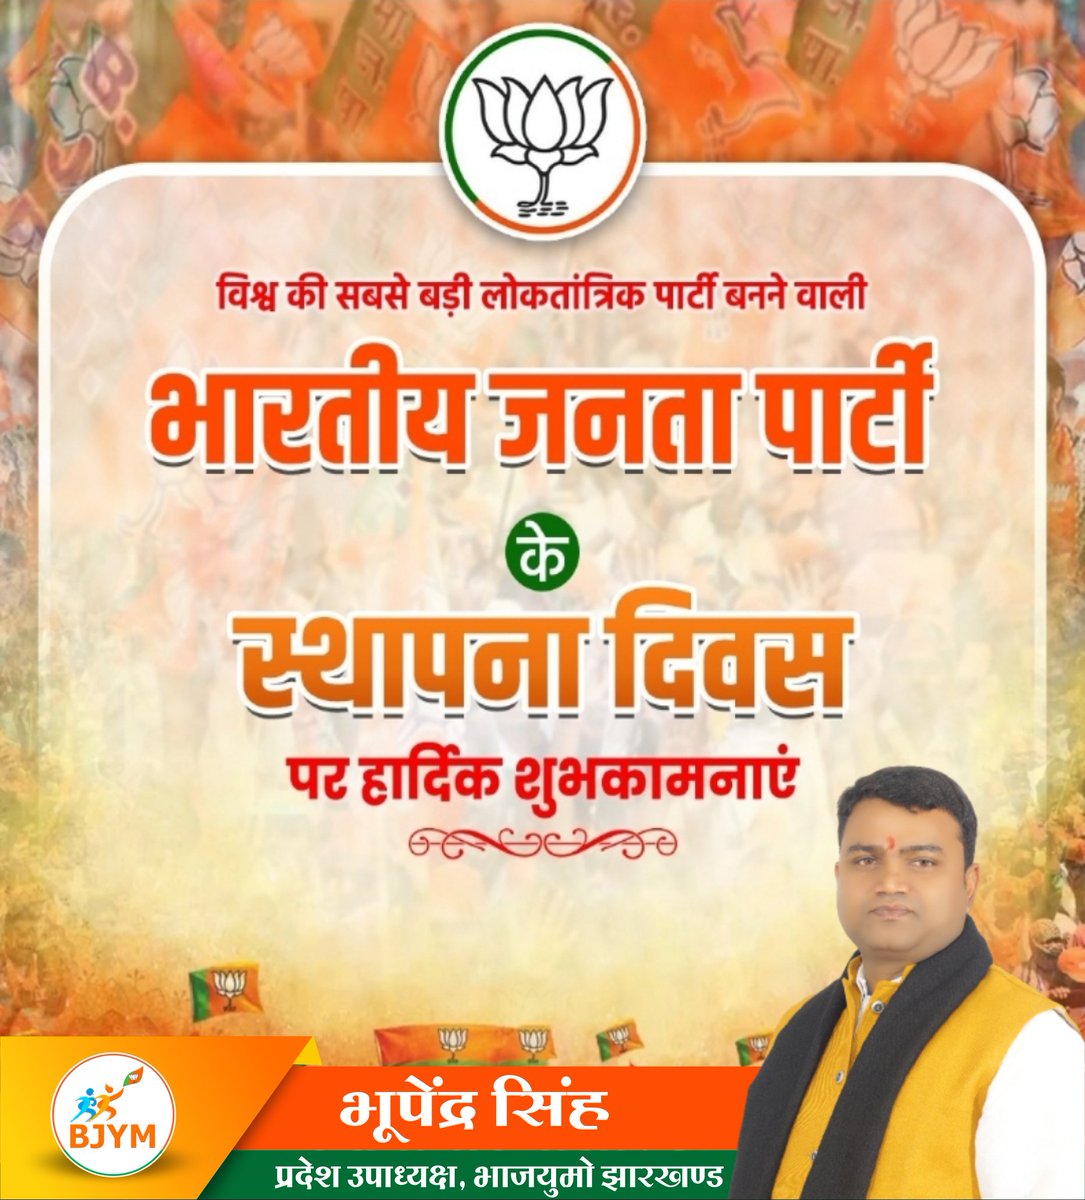 Bhupendra_BJYM tweet picture